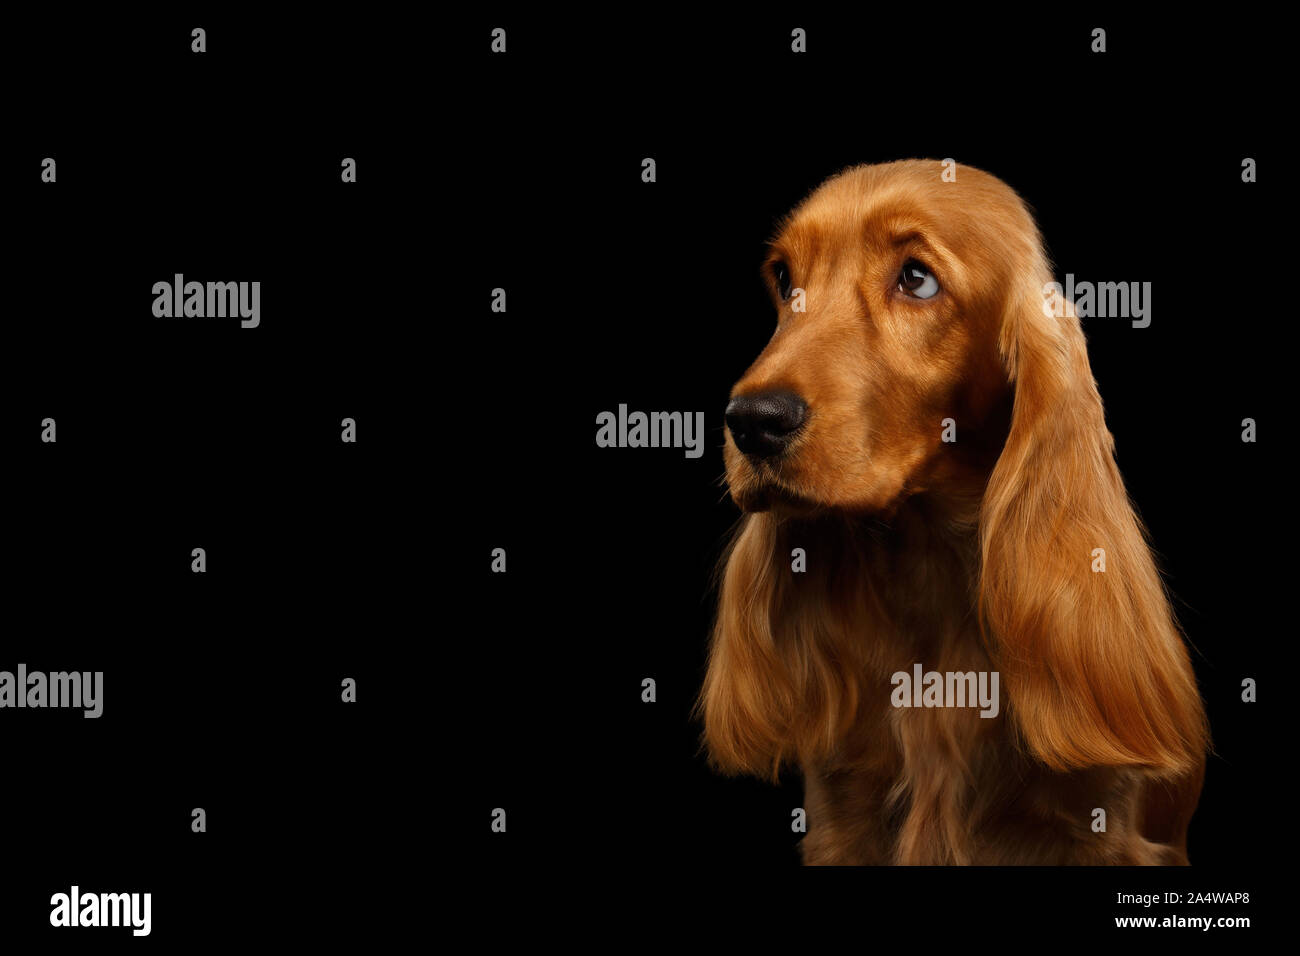 Sad Portrait of Red English Cocker Spaniel Dog looking at side on isolated black background Stock Photo